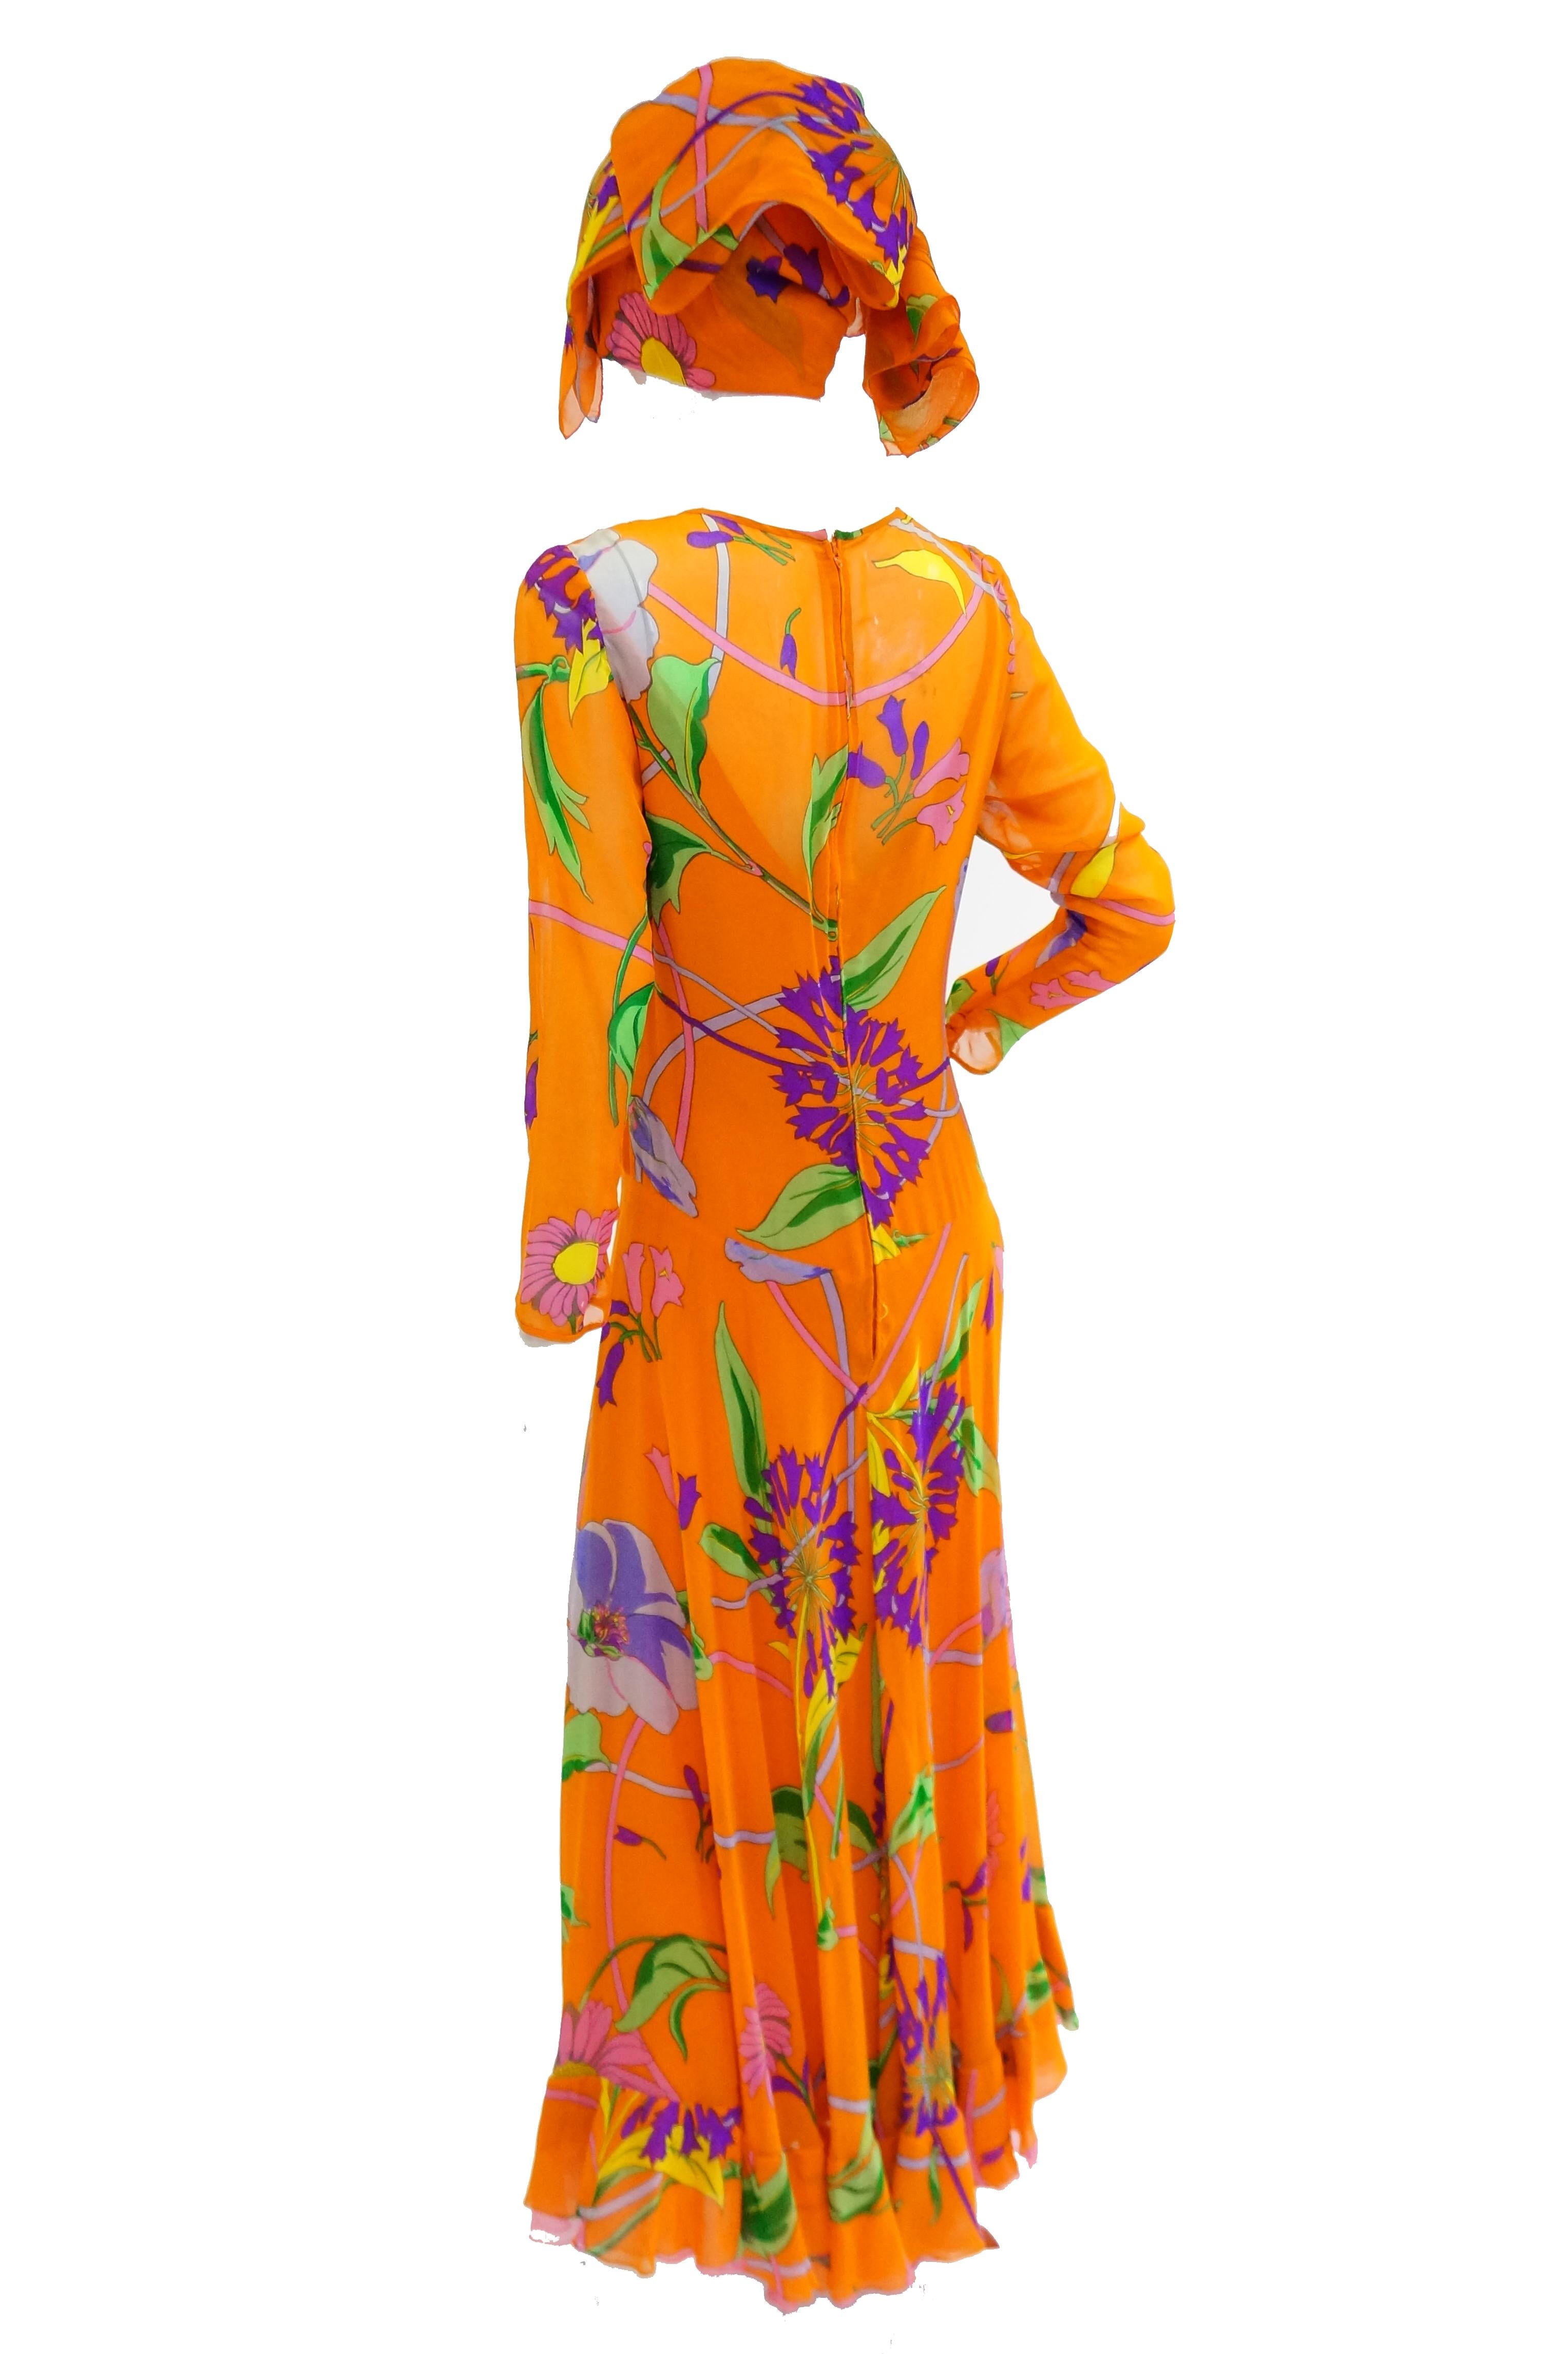 Women's 1970s Orange Floral Bias Cut Semi Sheer Dress with Oversized Shawl For Sale